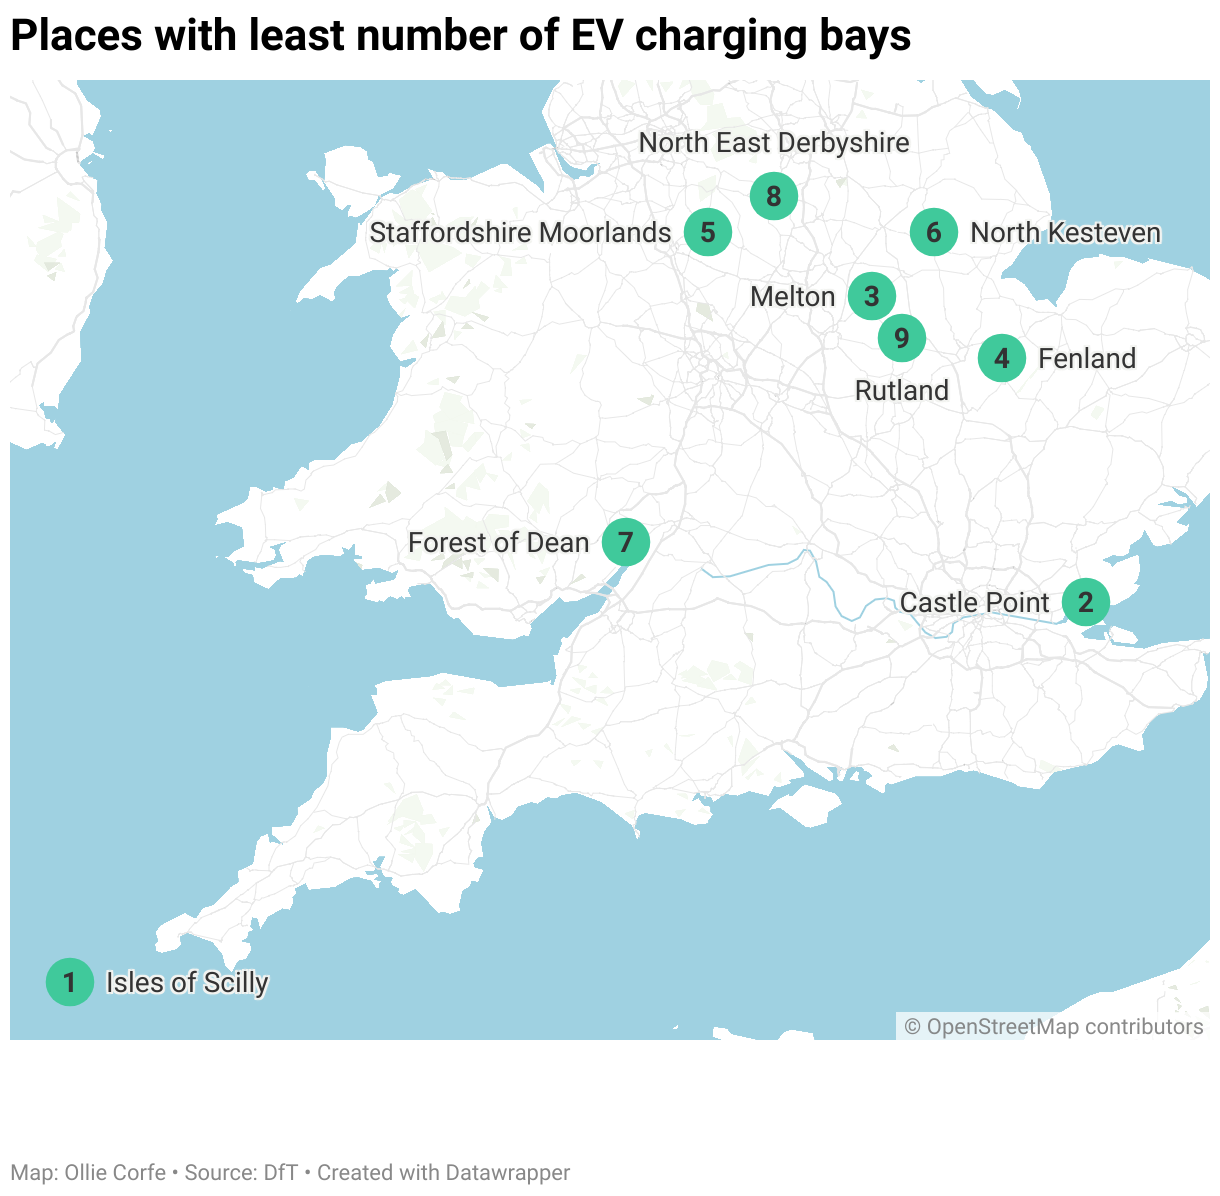 Map of areas with least amount of EV charging bays.